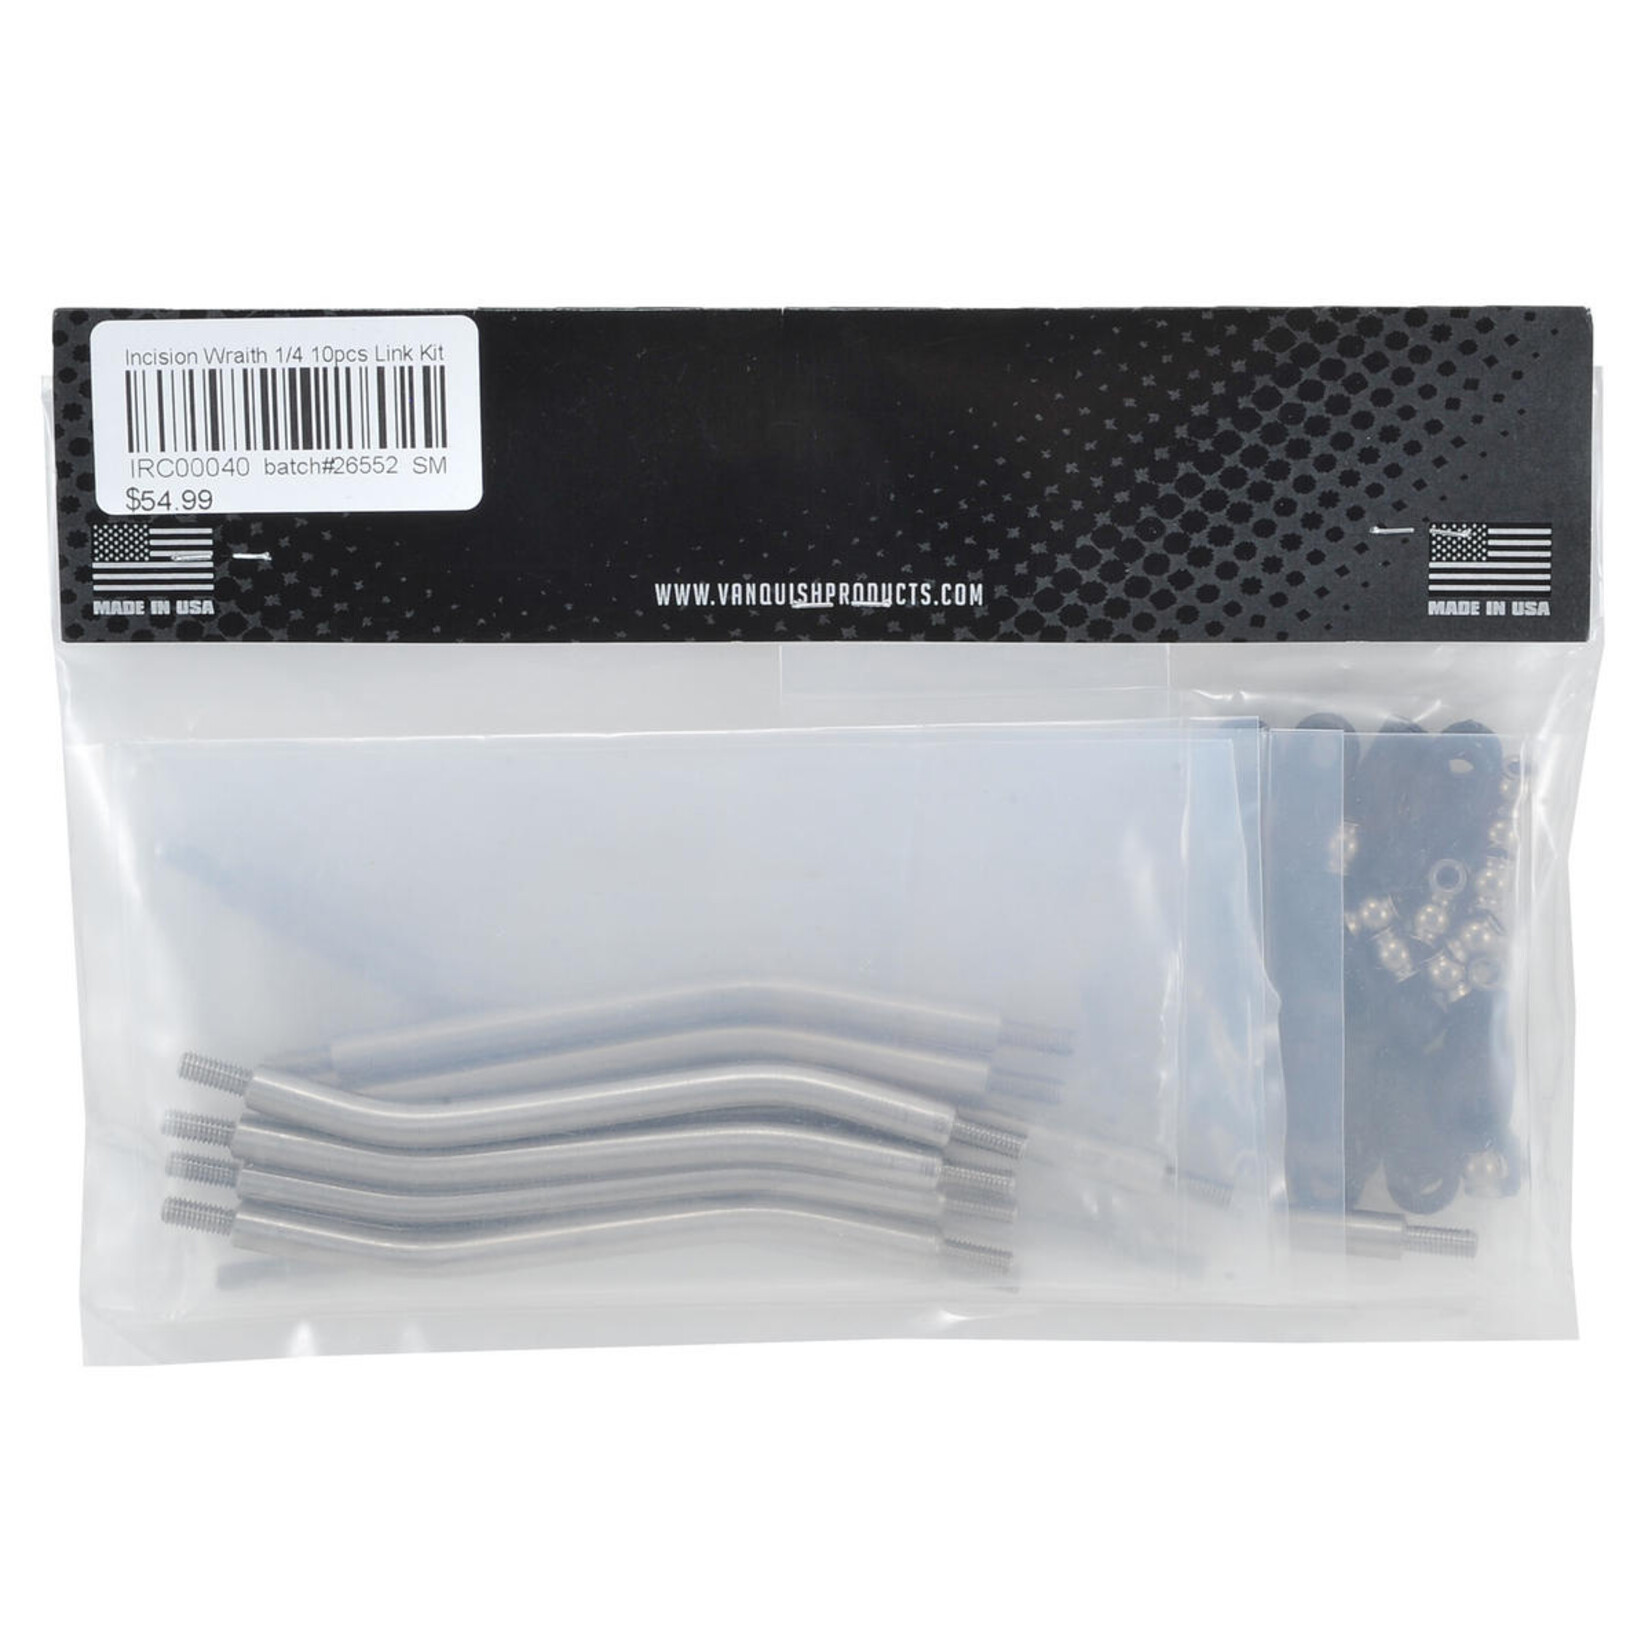 Incision Incision Wraith 1/4 Stainless Steel Link Set (10) #IRC00040